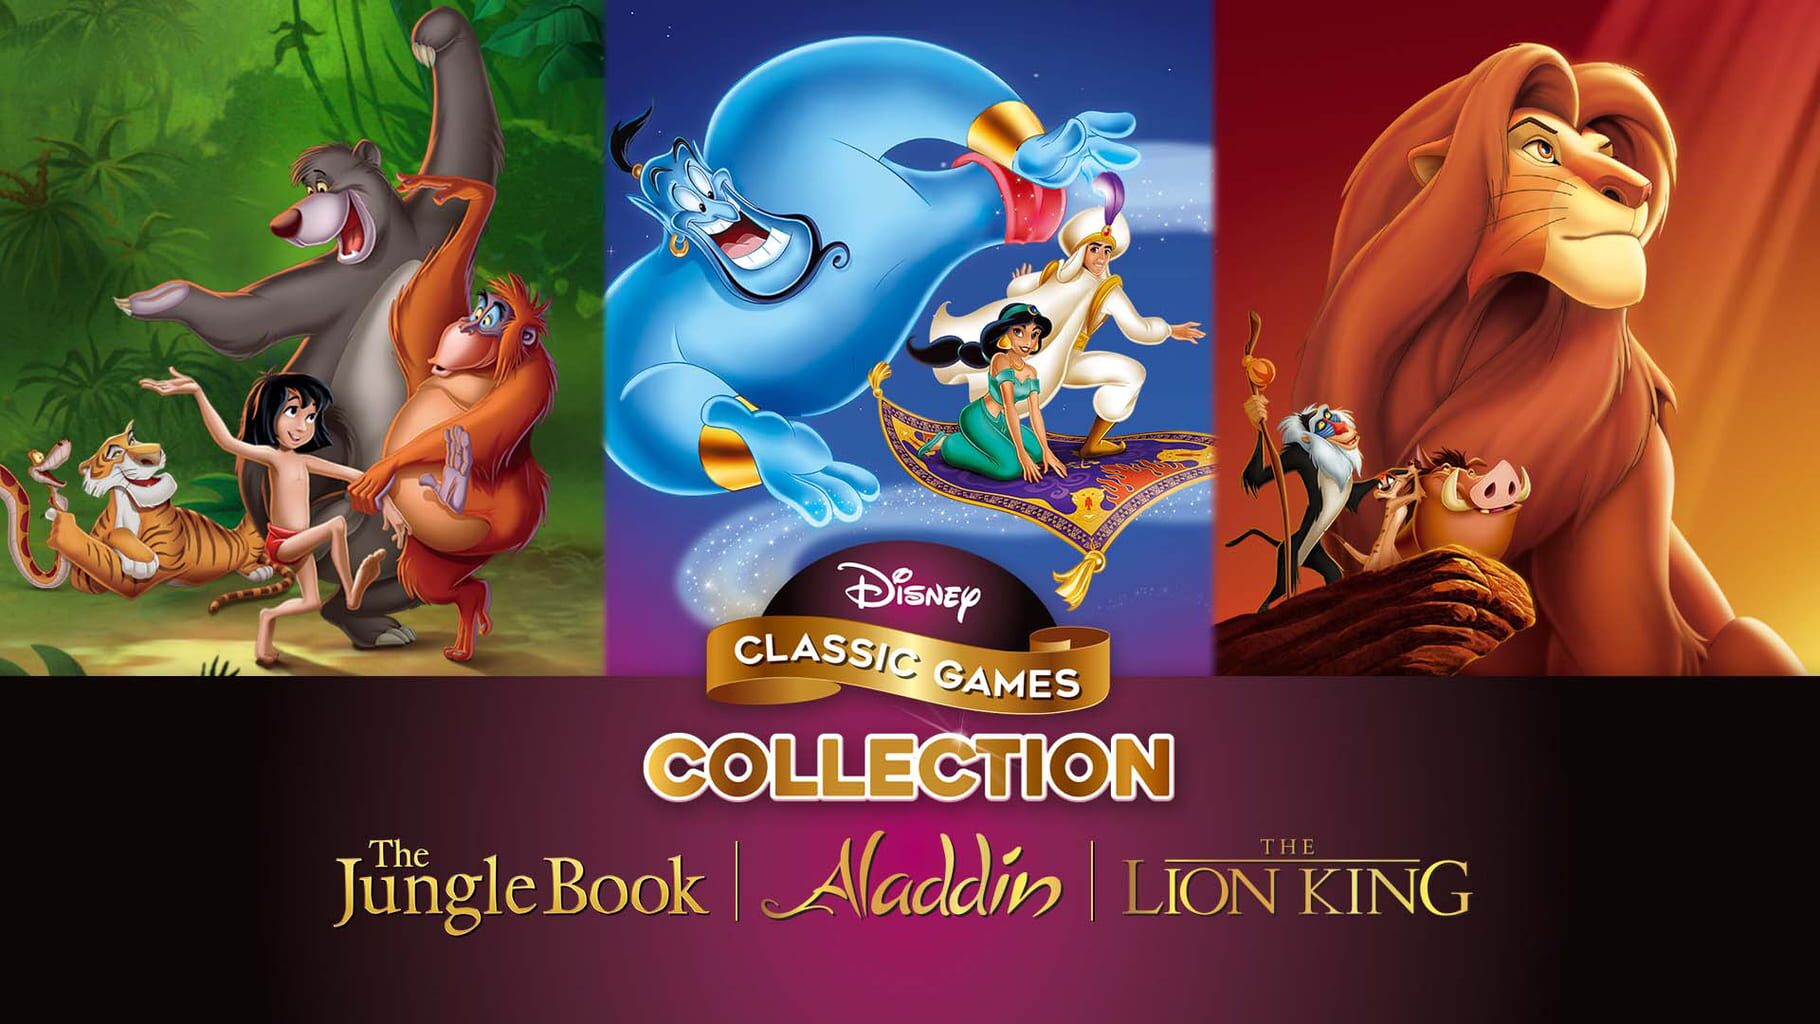 Disney Classic Games: Aladdin and The Lion King - The Jungle Book and More Aladdin Pack Image